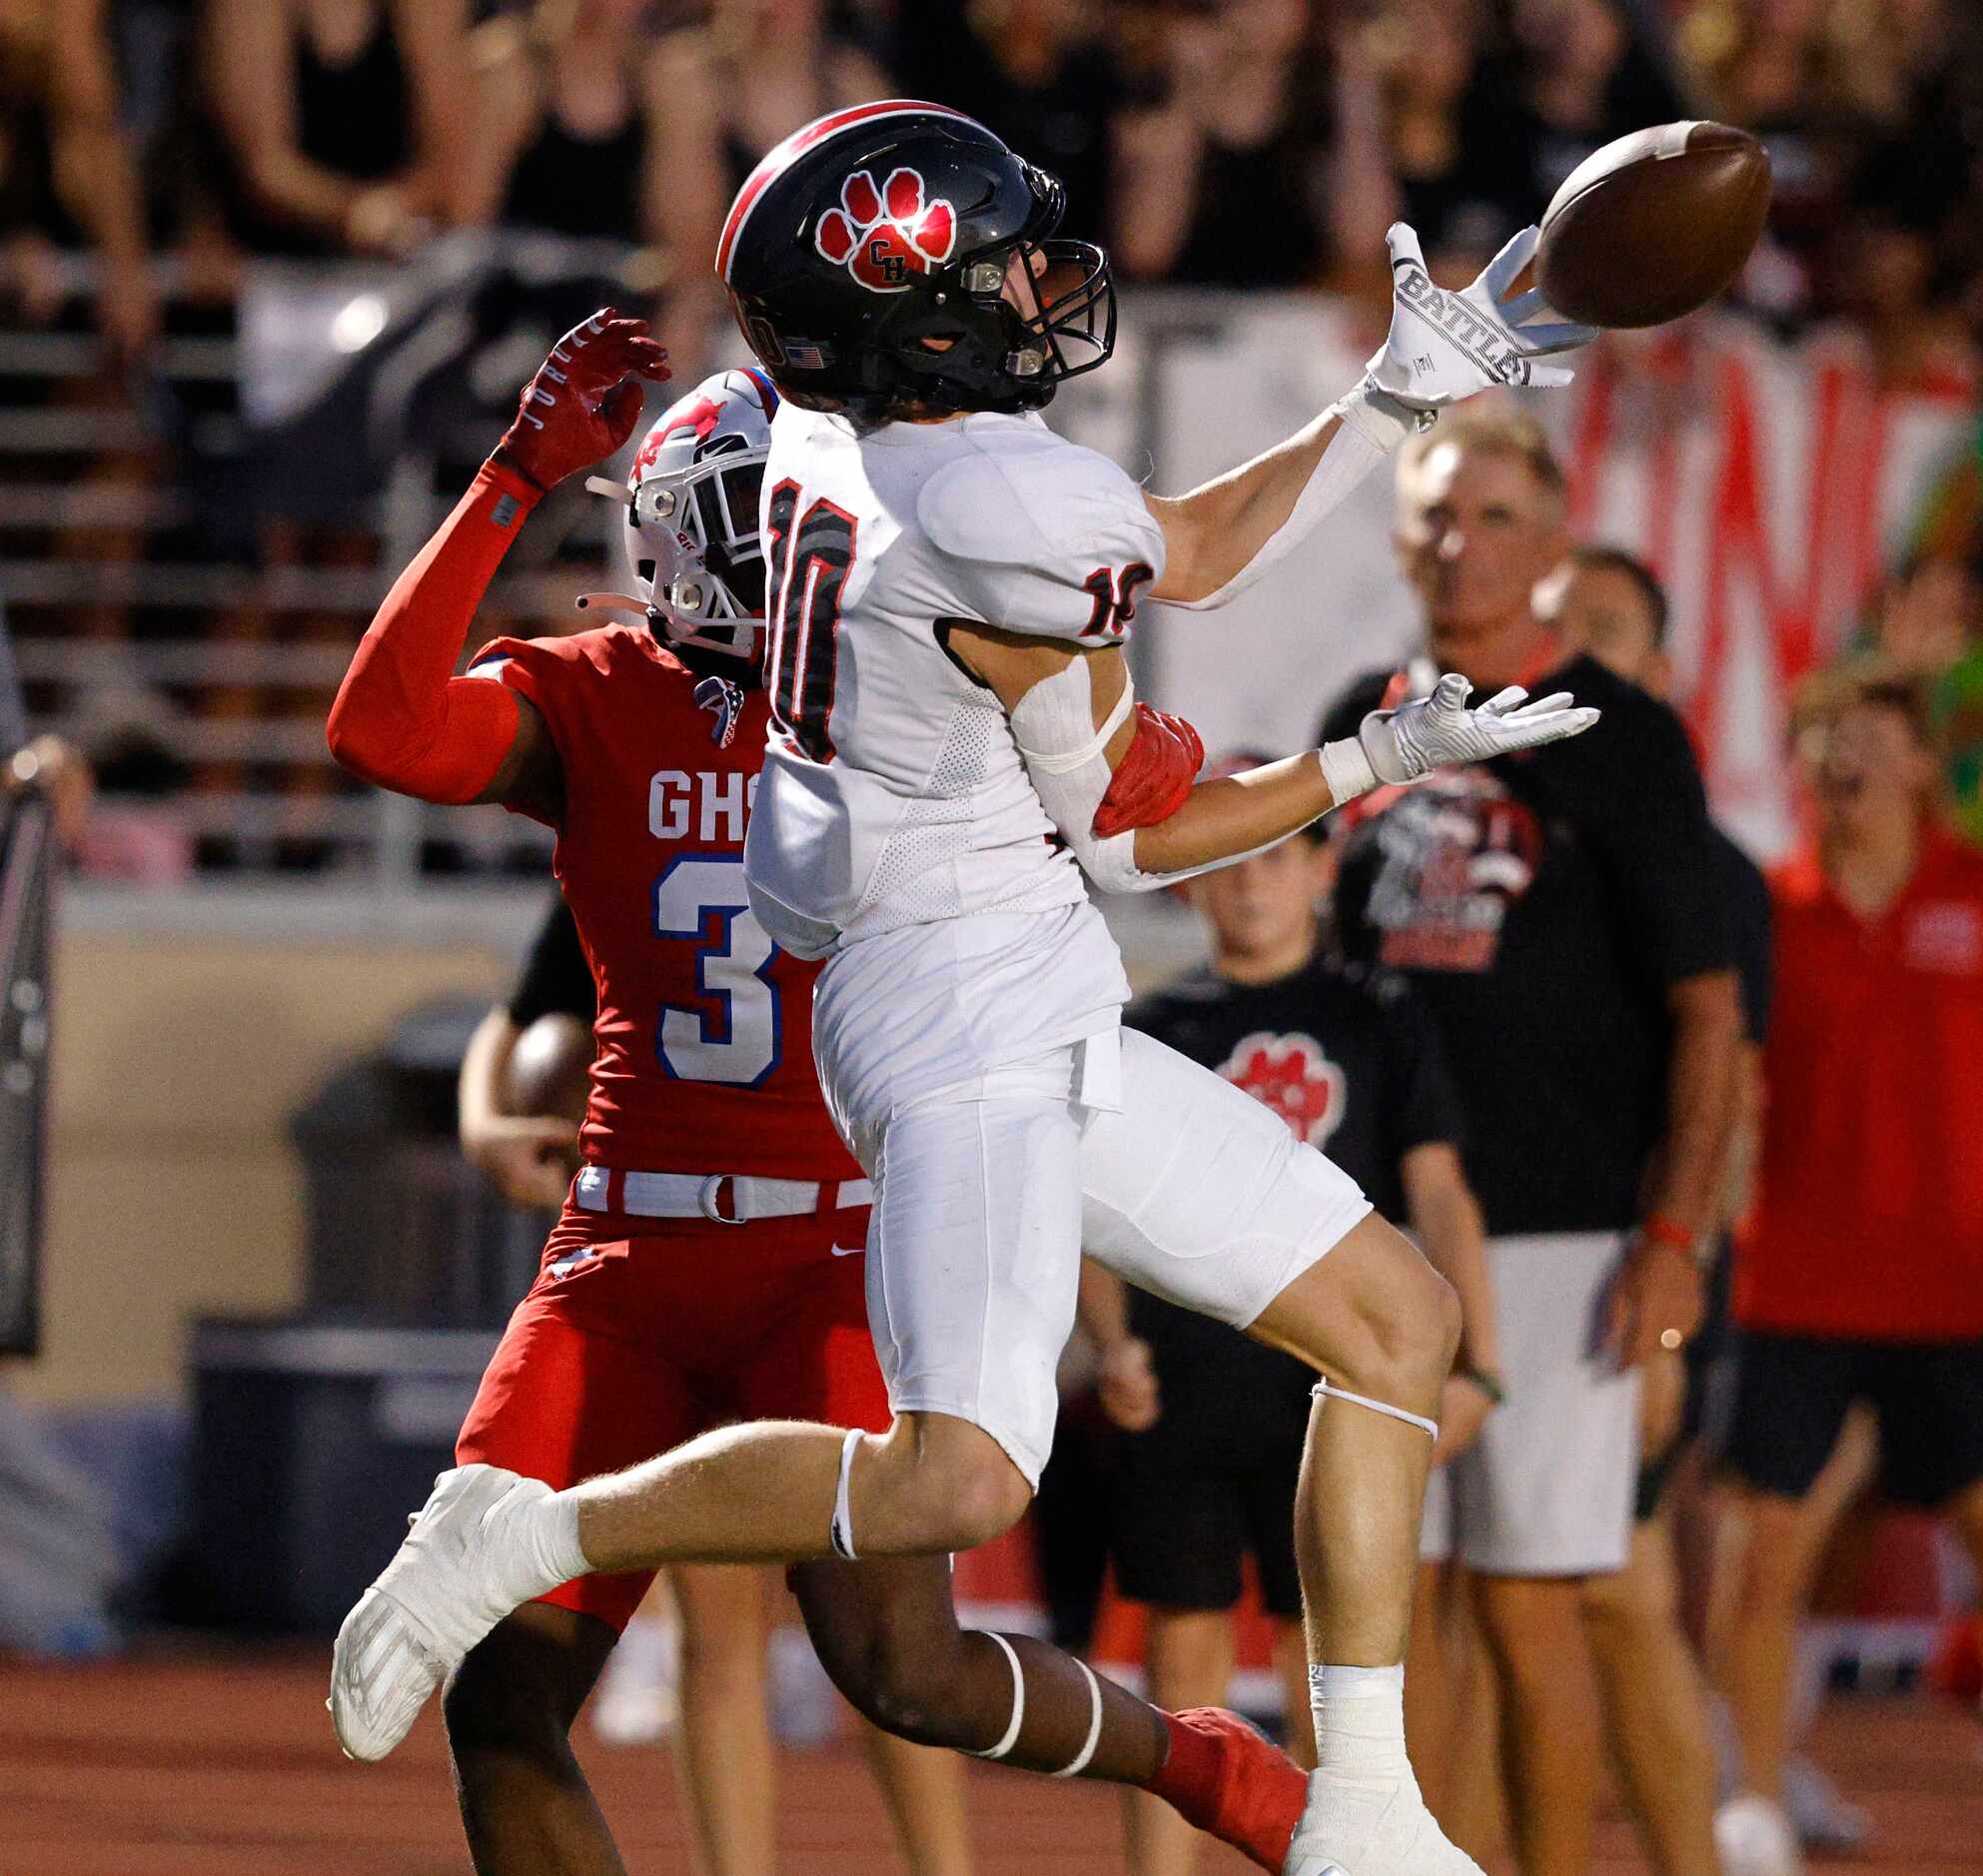 Colleyville Heritage's Kai Pruitt (10) fails to make the catch against Grapevine's Dereon...